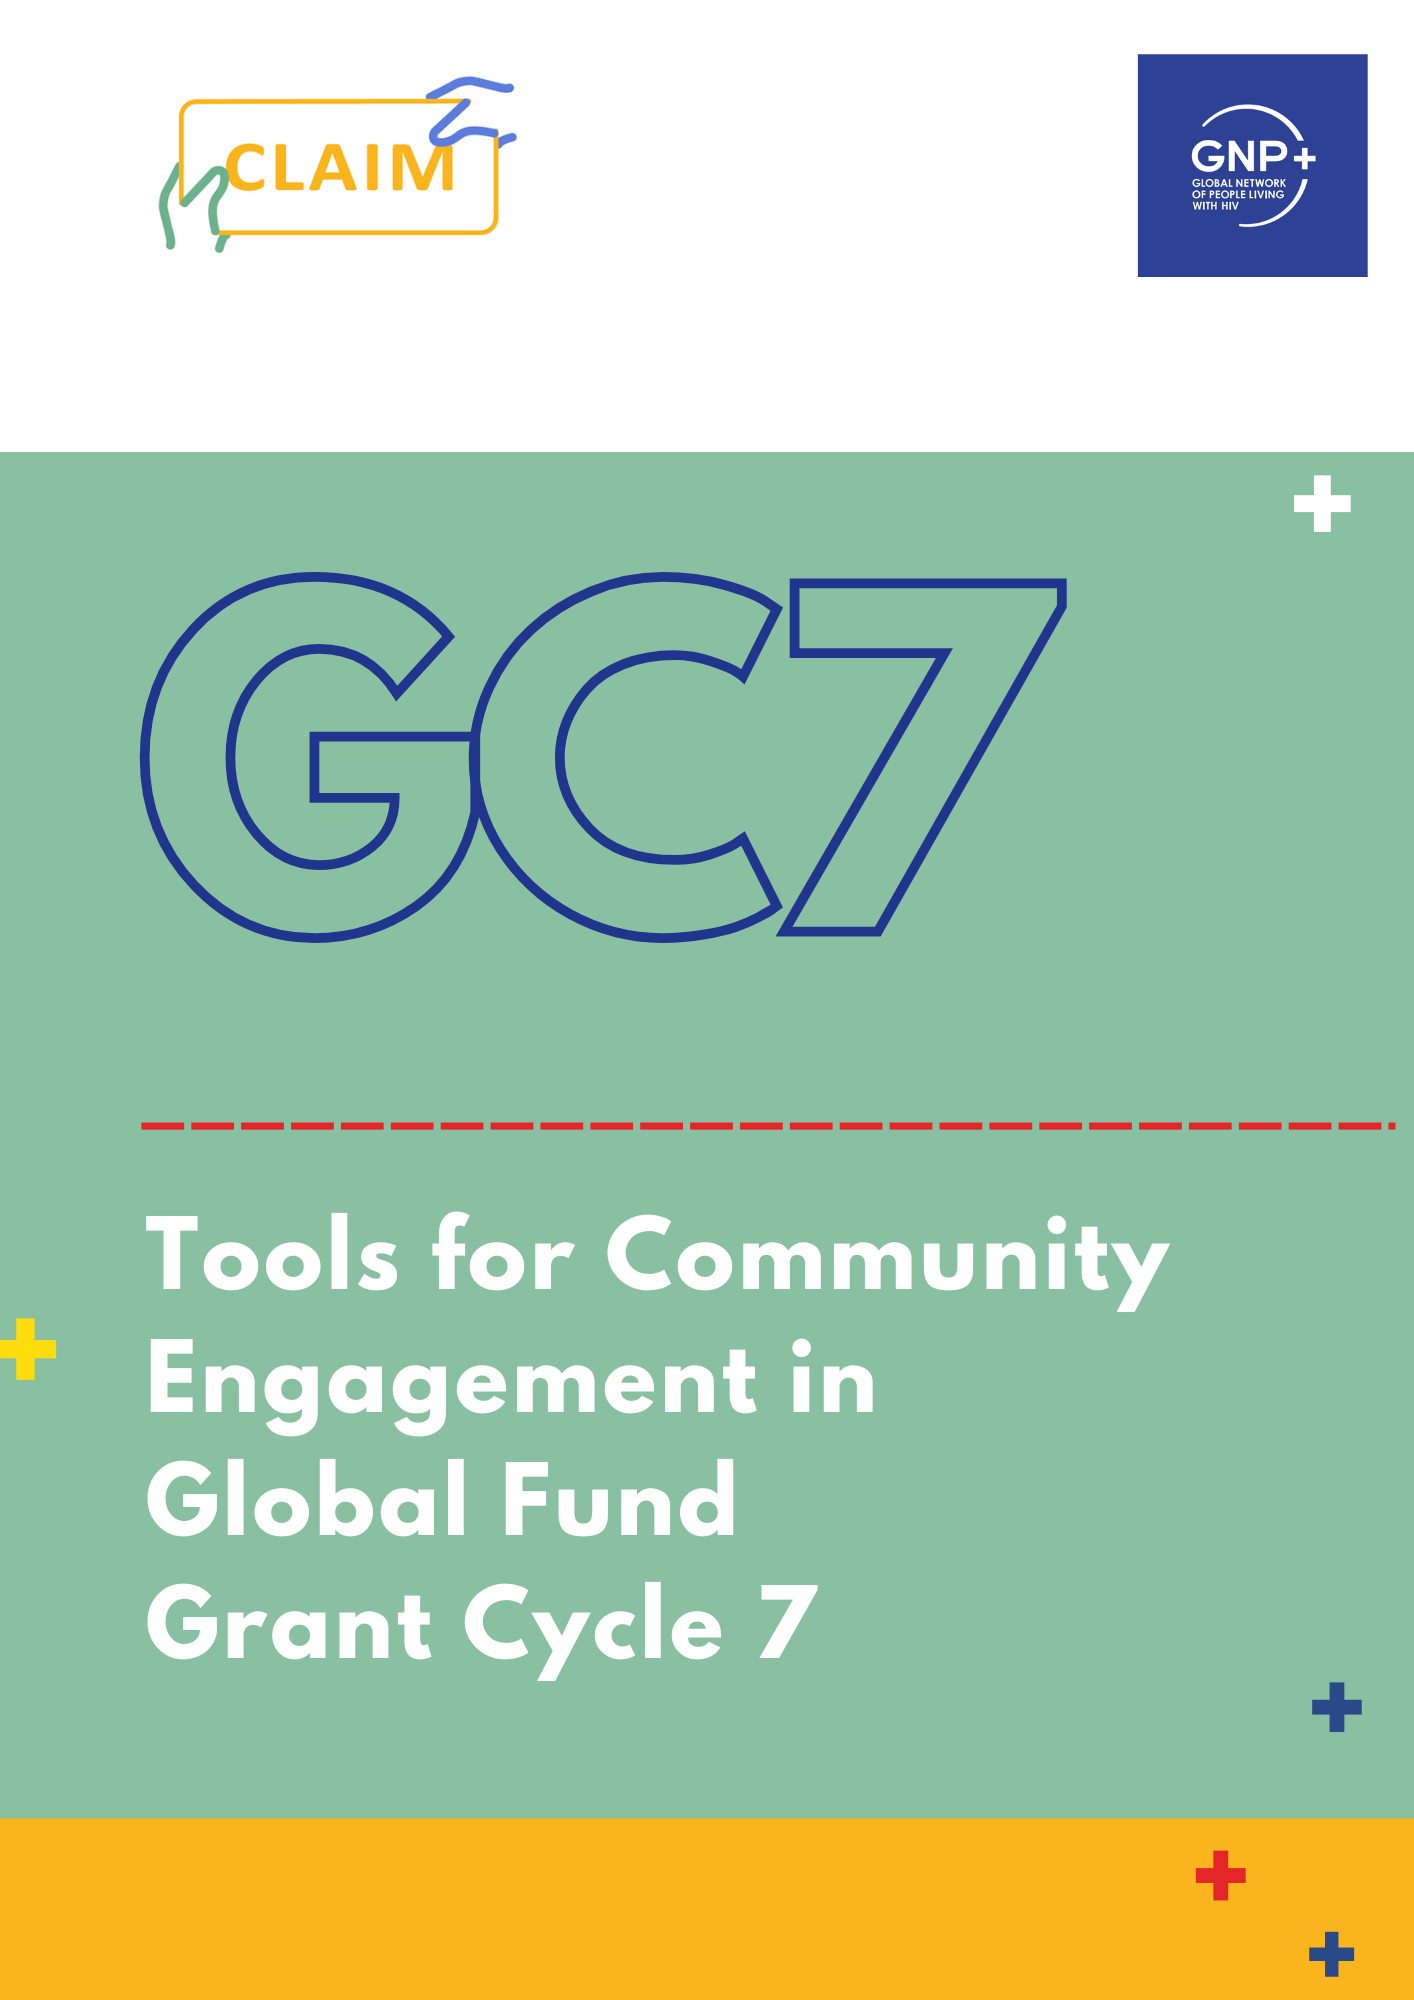 Tools for community engagement in Global Fund Grant Cycle 7 (GC7)